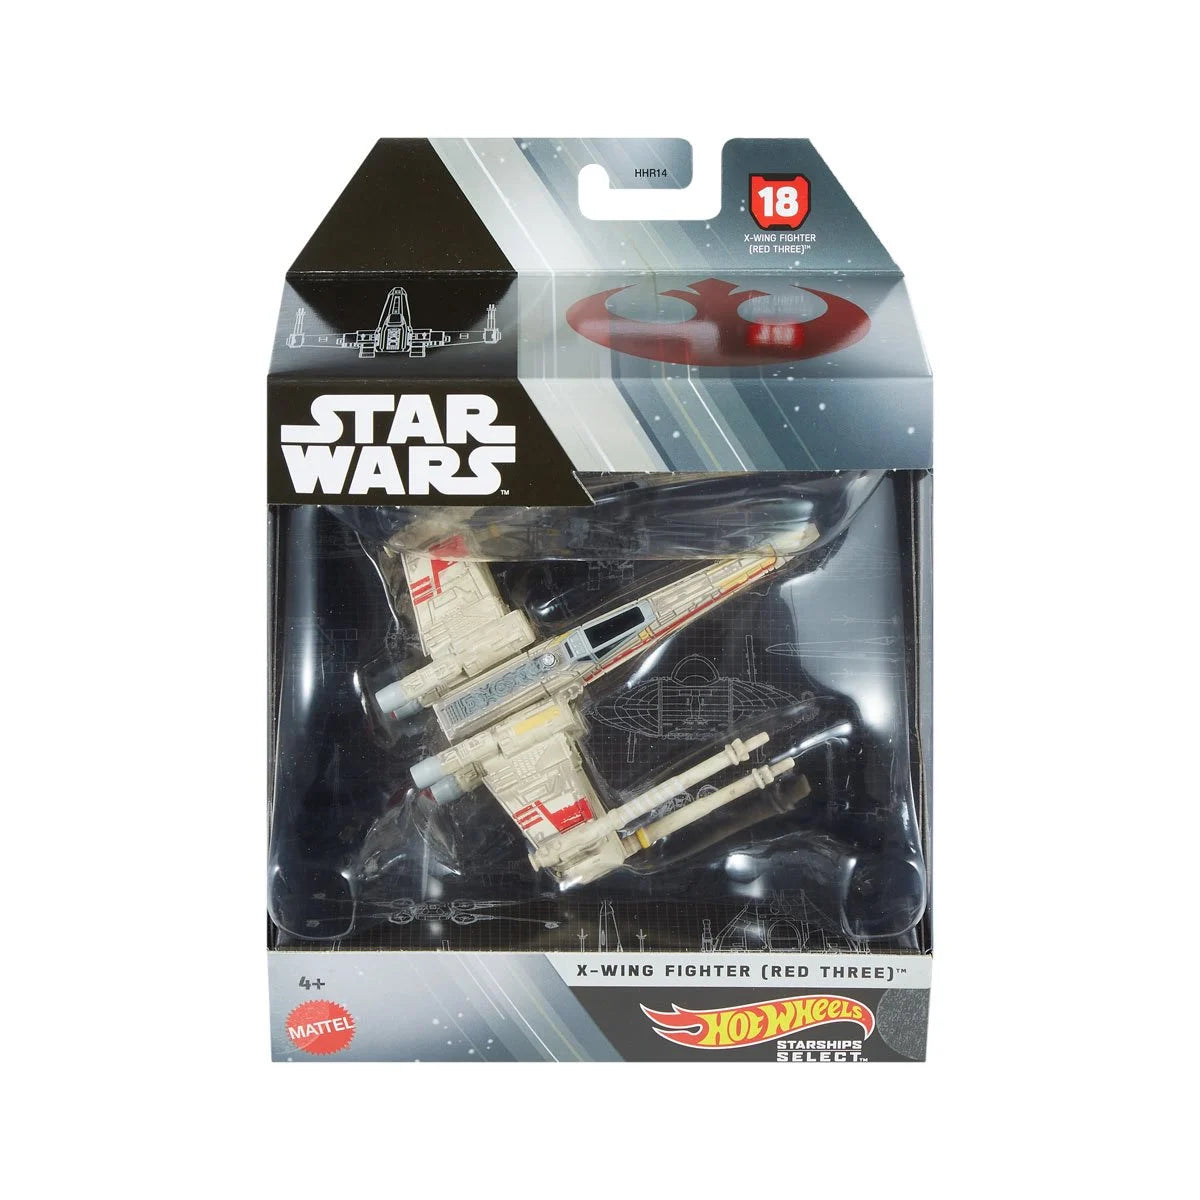 X-Wing Fighter (red three) Starship